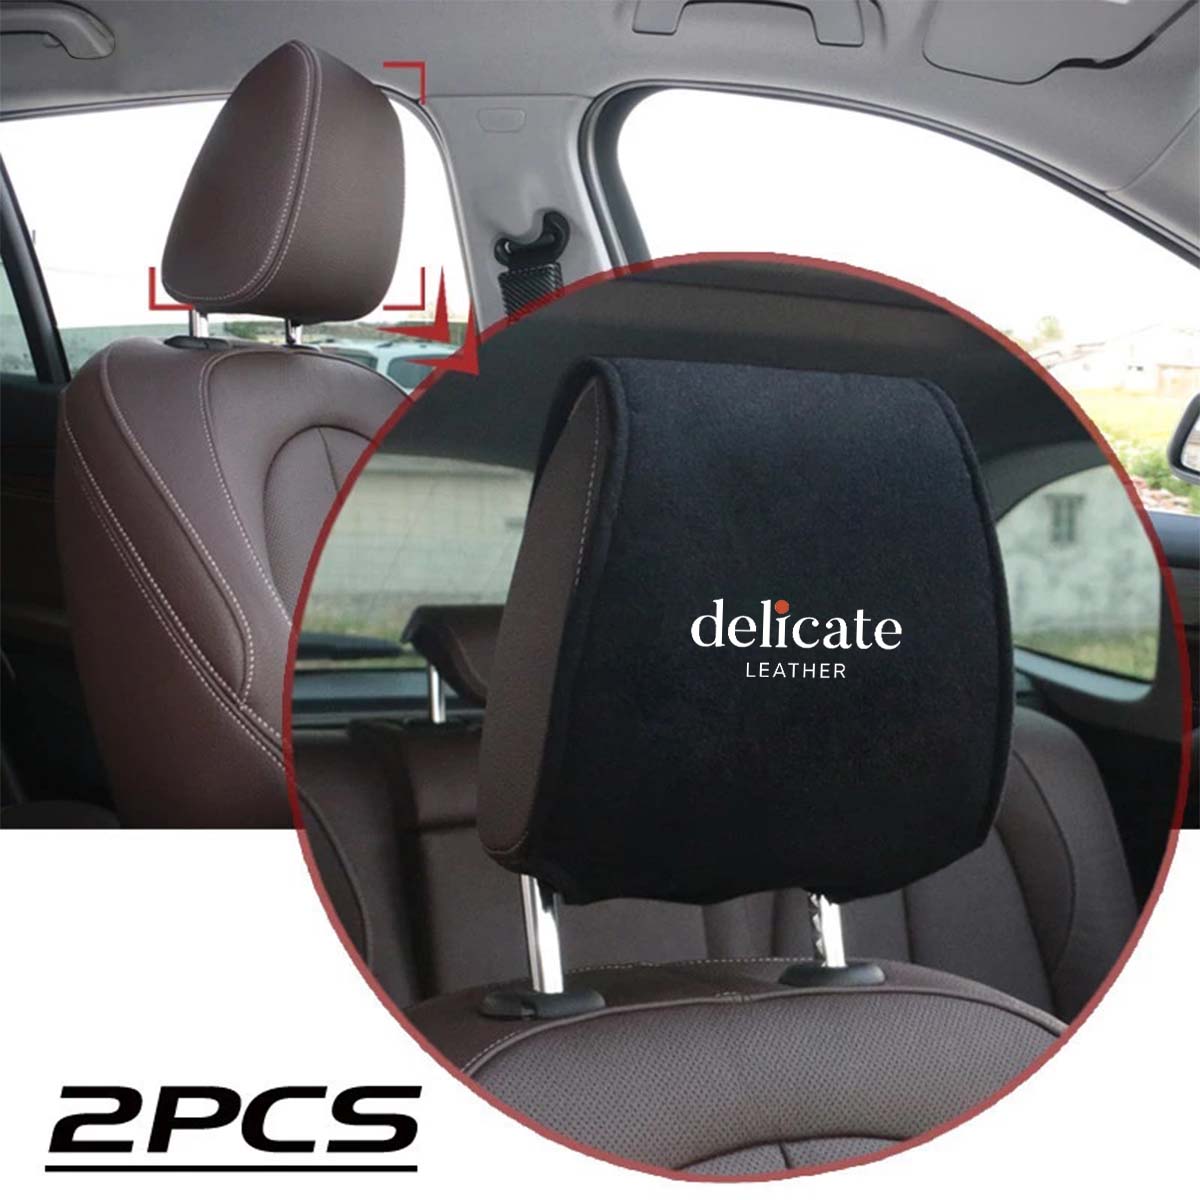 Delicate Leather Car Seat Headrest Cover: Stylish Protection